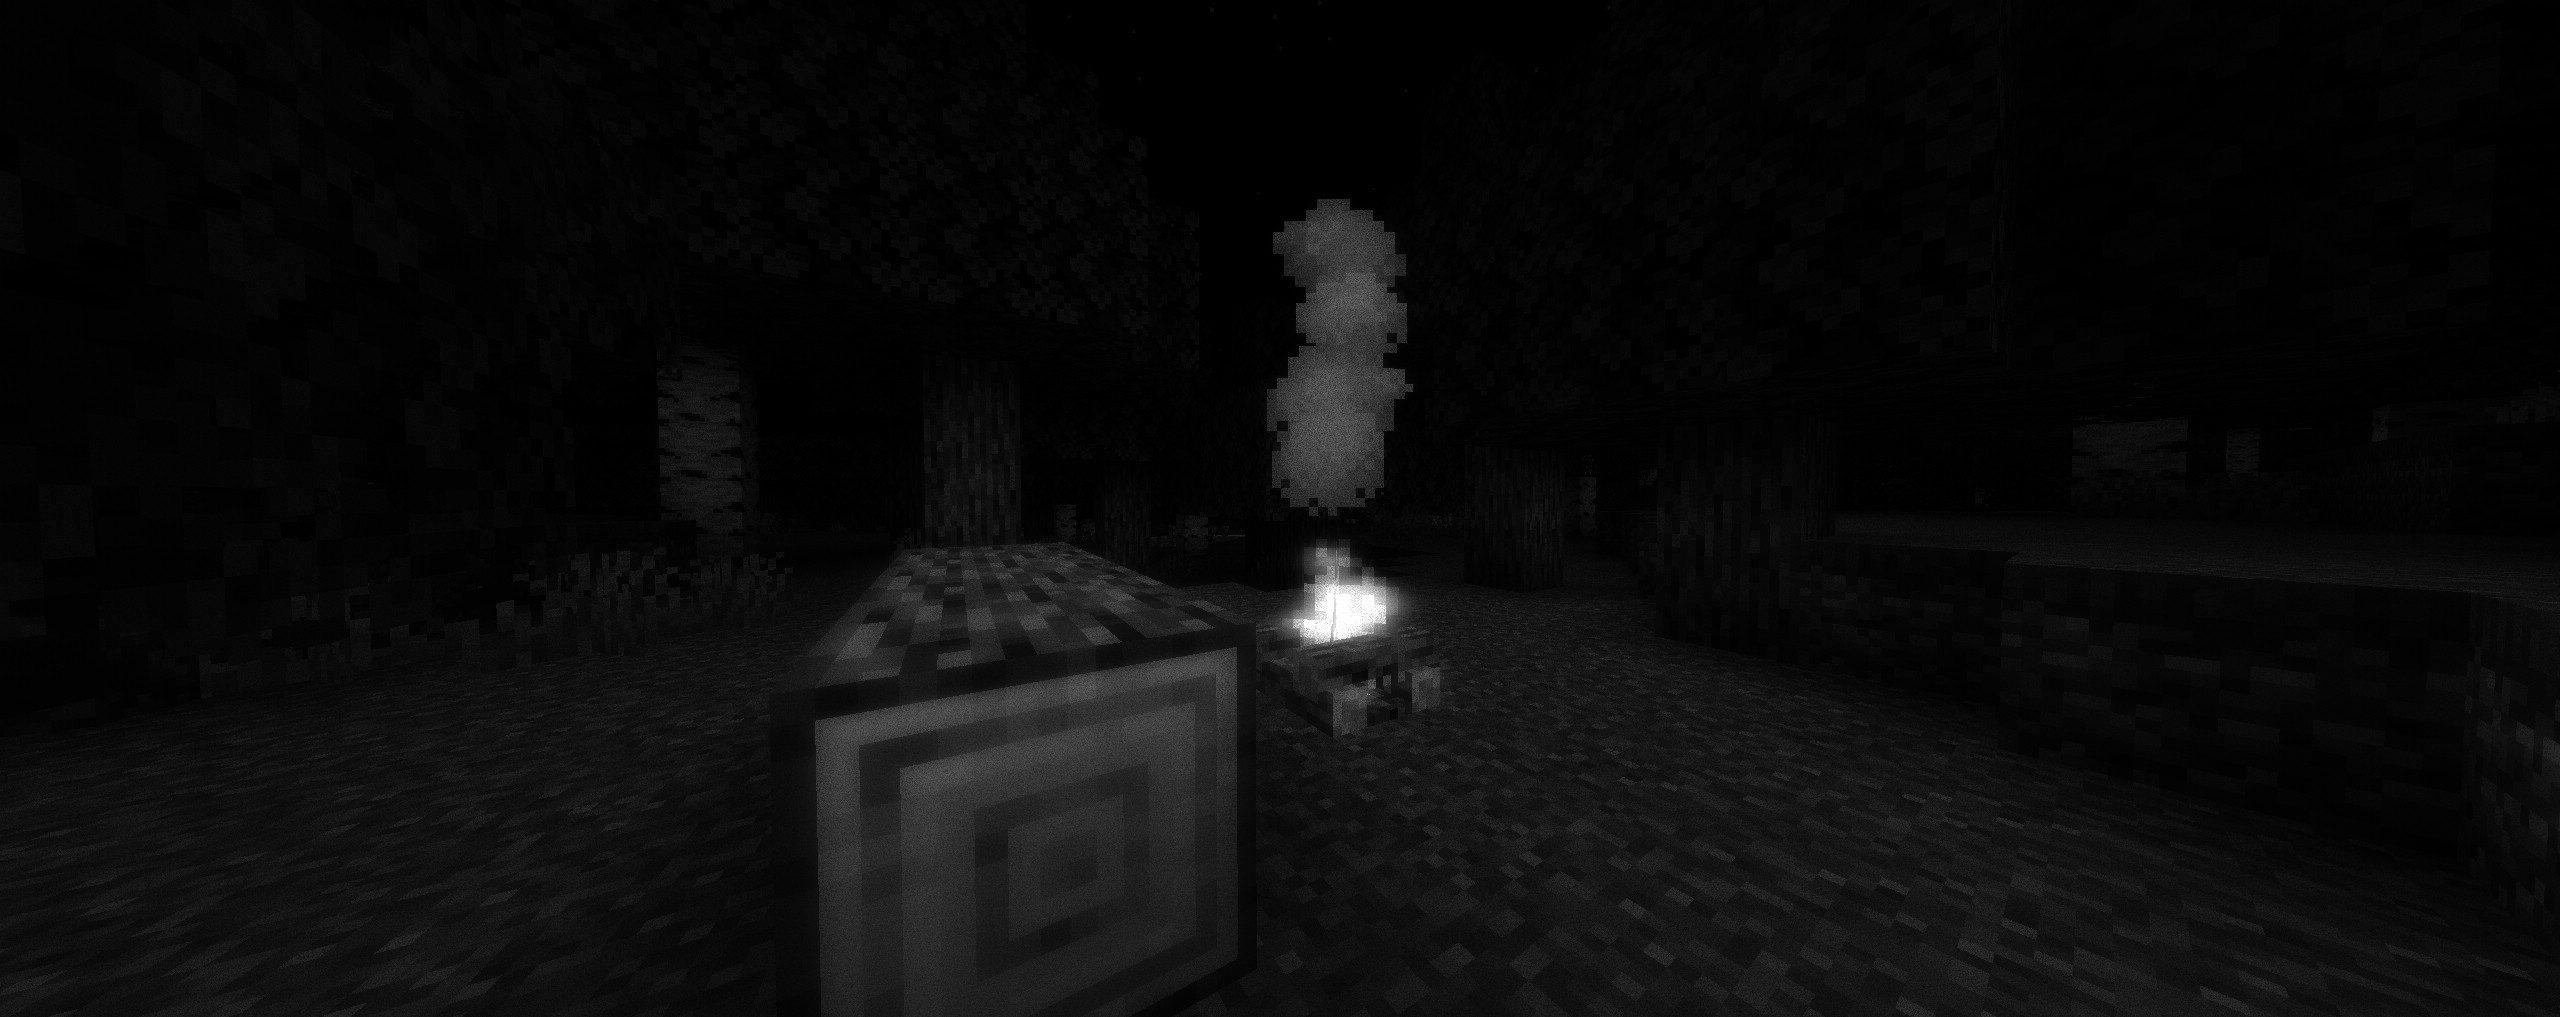 Lymbo Shaders (1.20.4, 1.19.4) - Gray World, Ghostly Covering 5